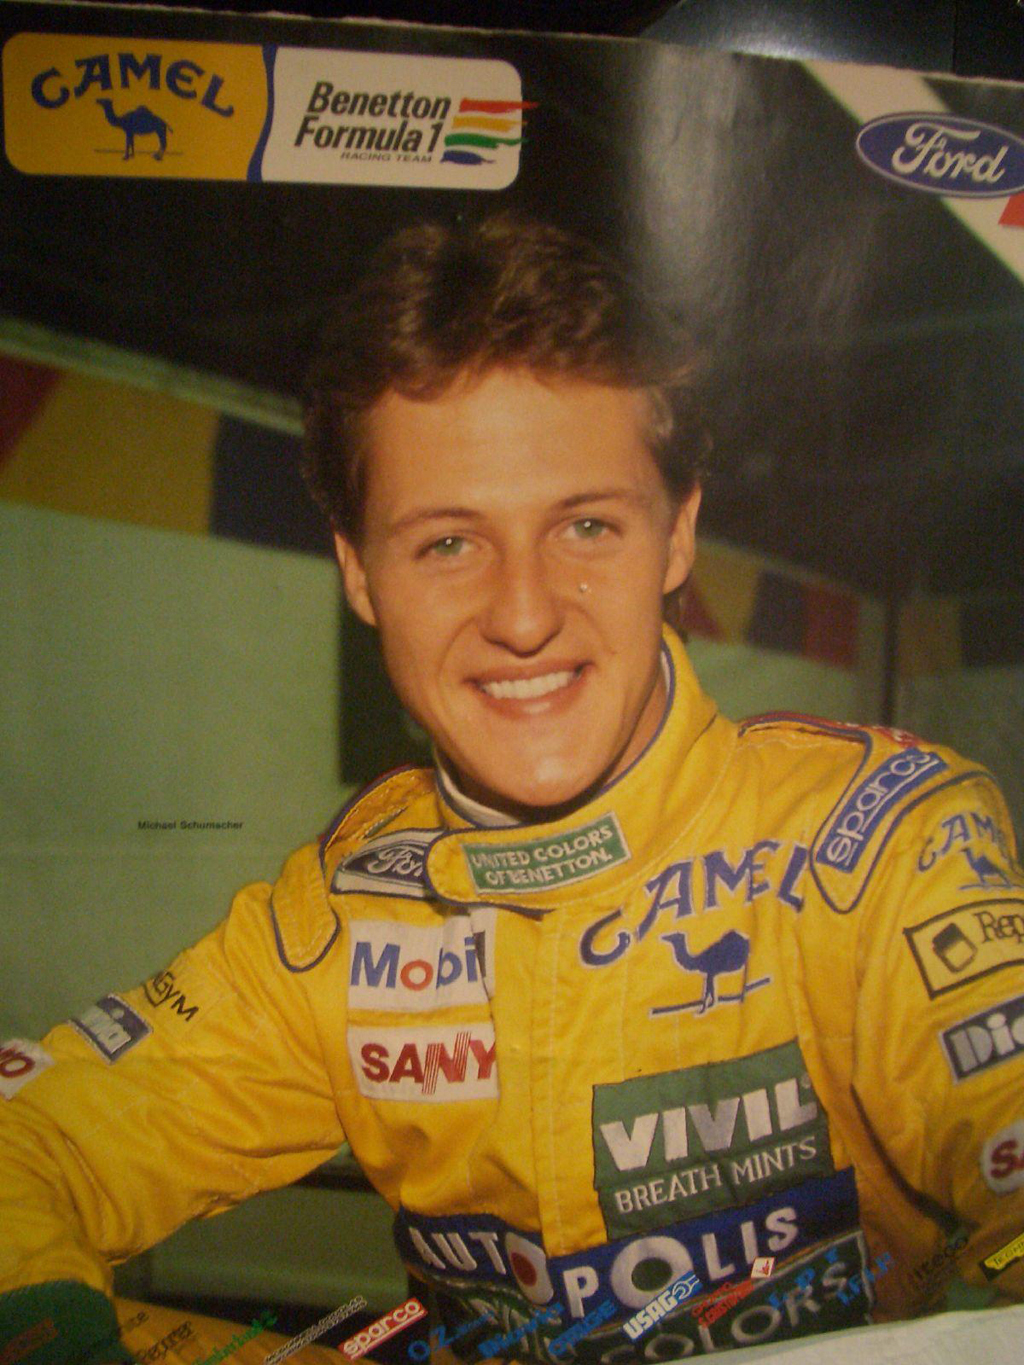 Michael-Schumacher-young-age